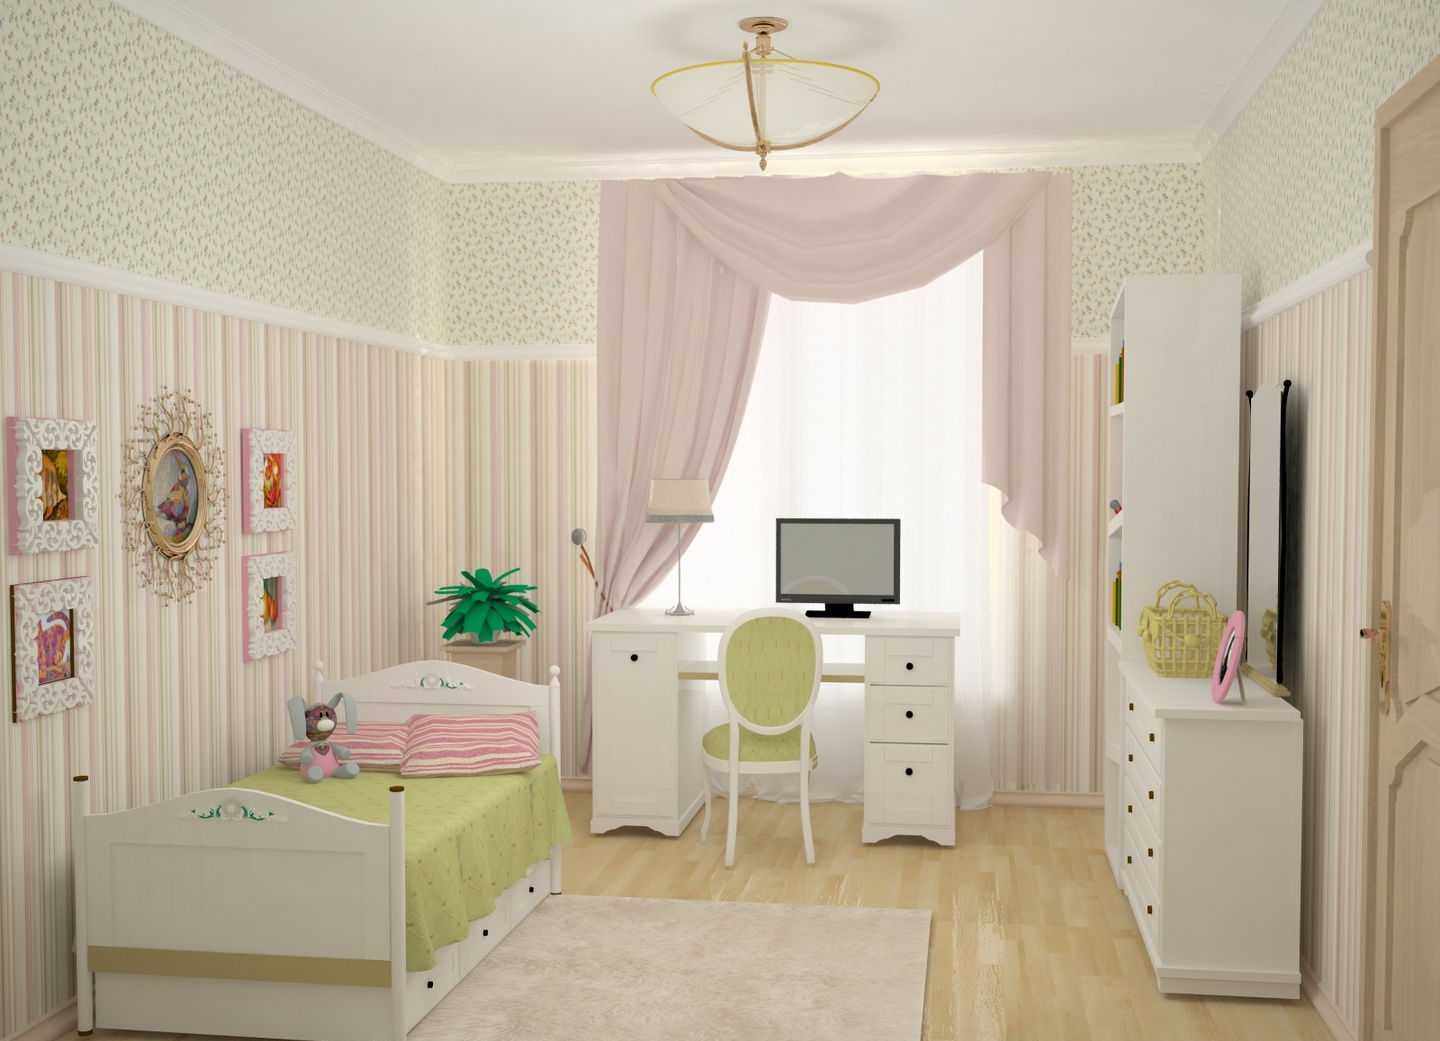 variant of the bright decor of the children's room